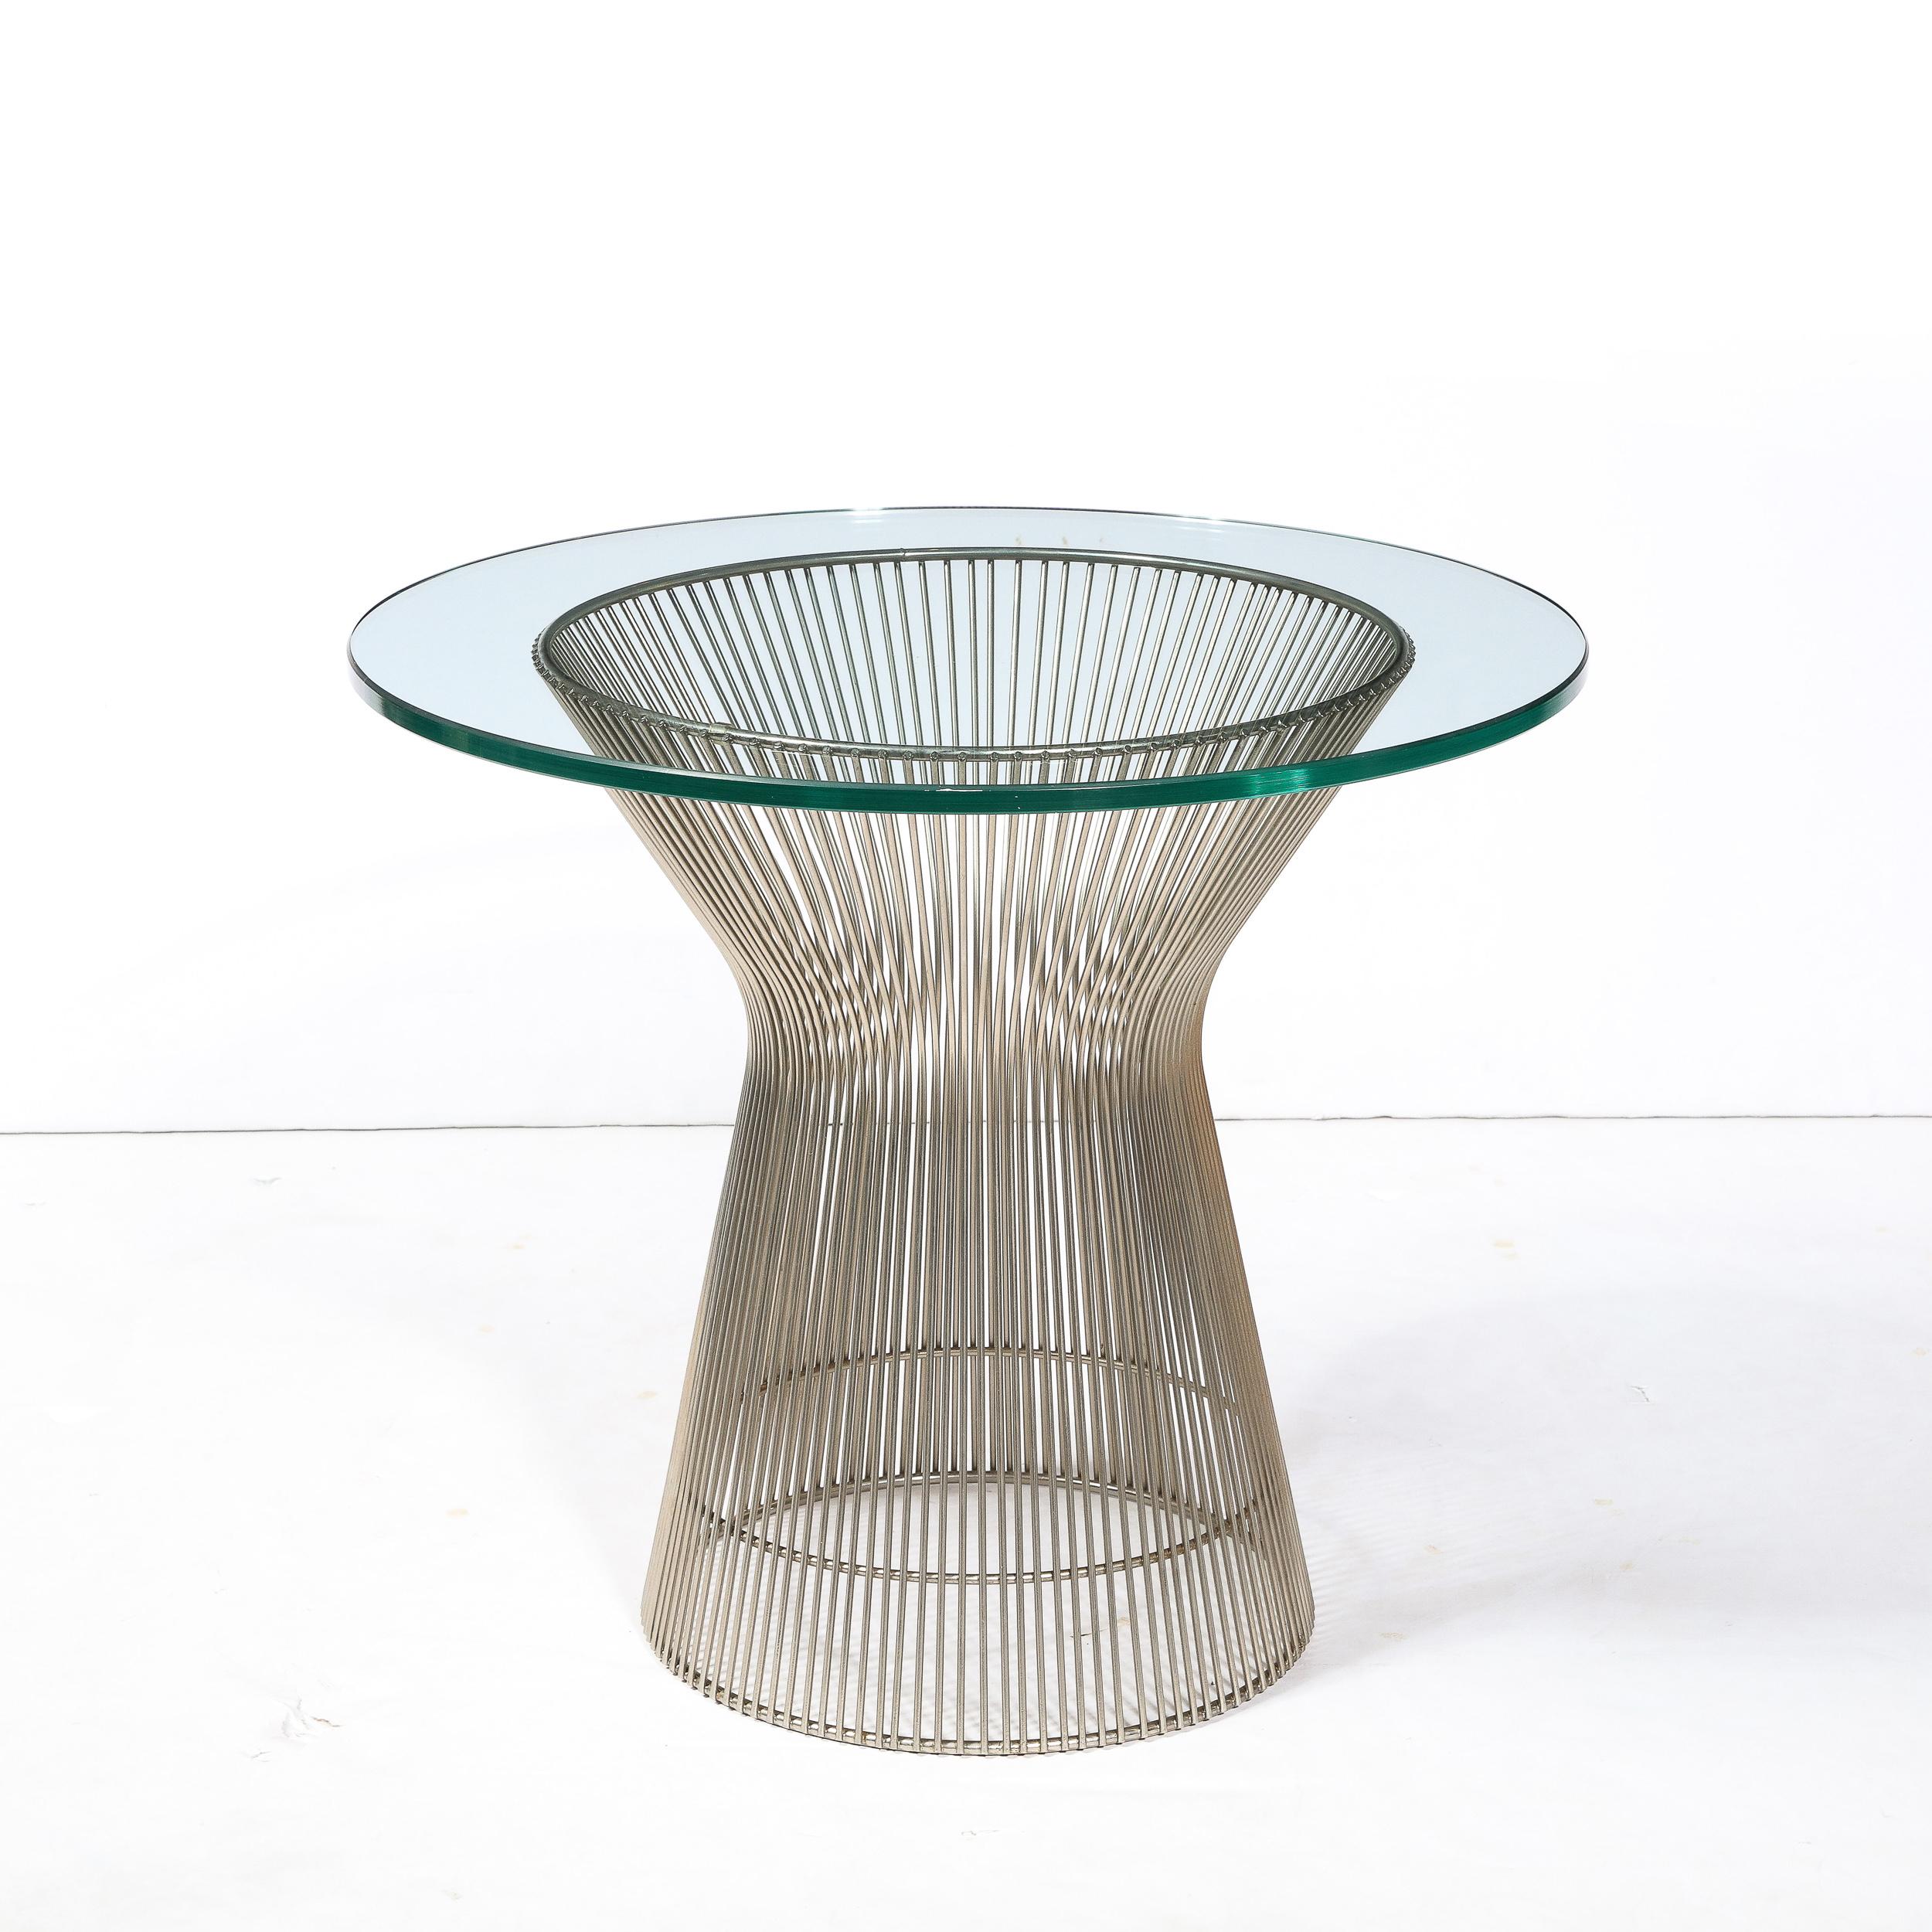 Pair of Mid-Century Modernist Polished Nickel Side Tables by Warren Platner For Sale 2